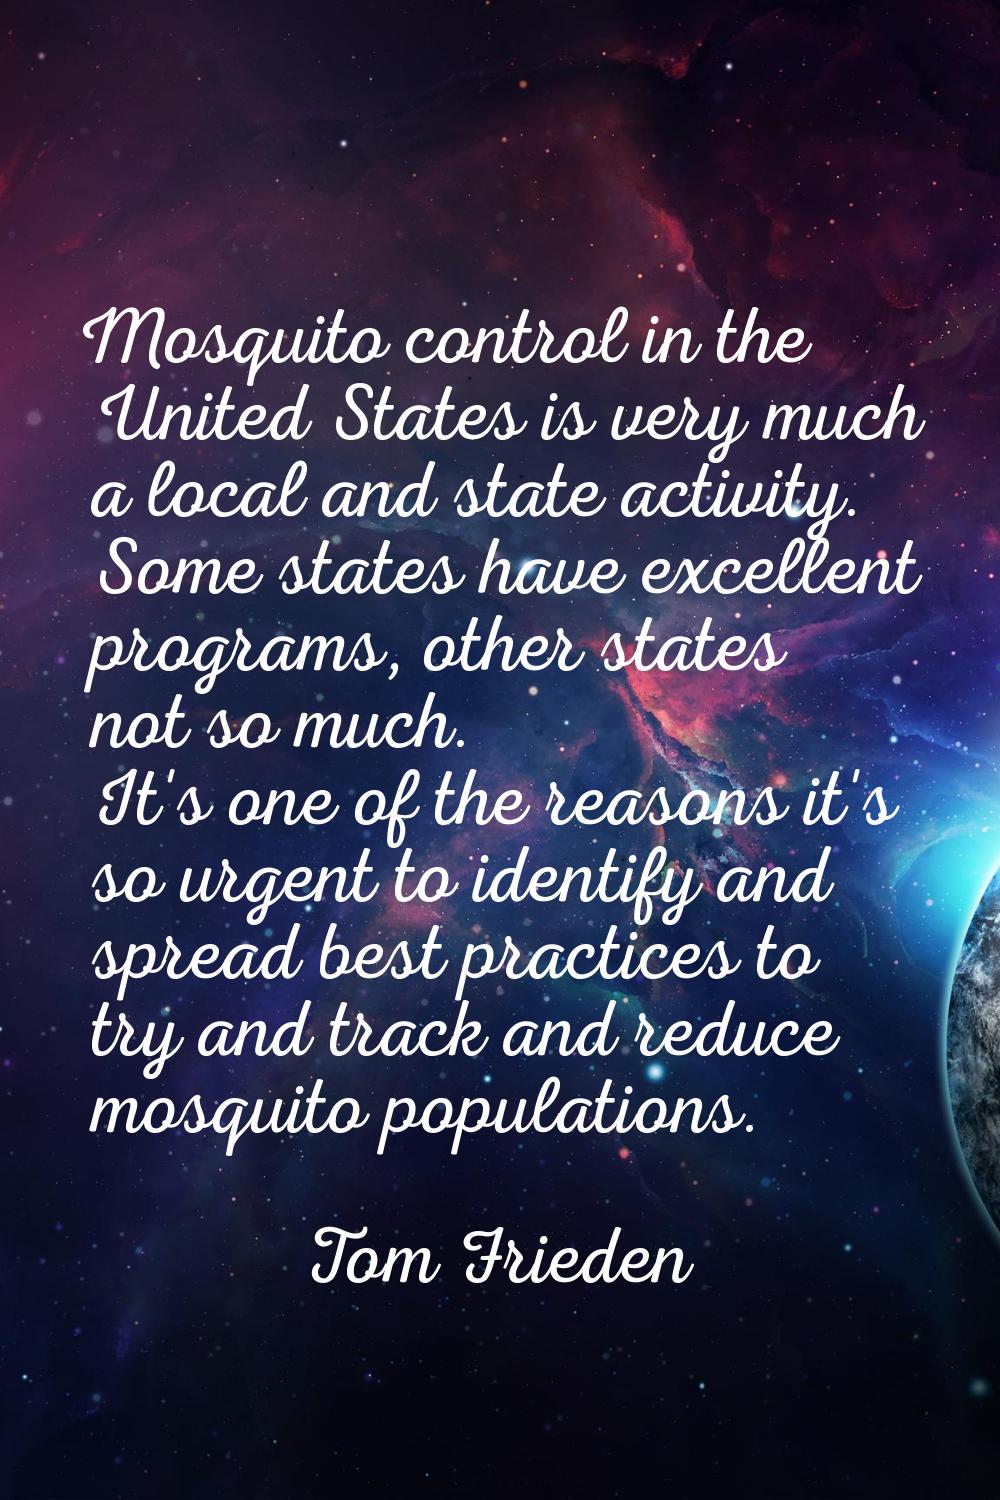 Mosquito control in the United States is very much a local and state activity. Some states have exc